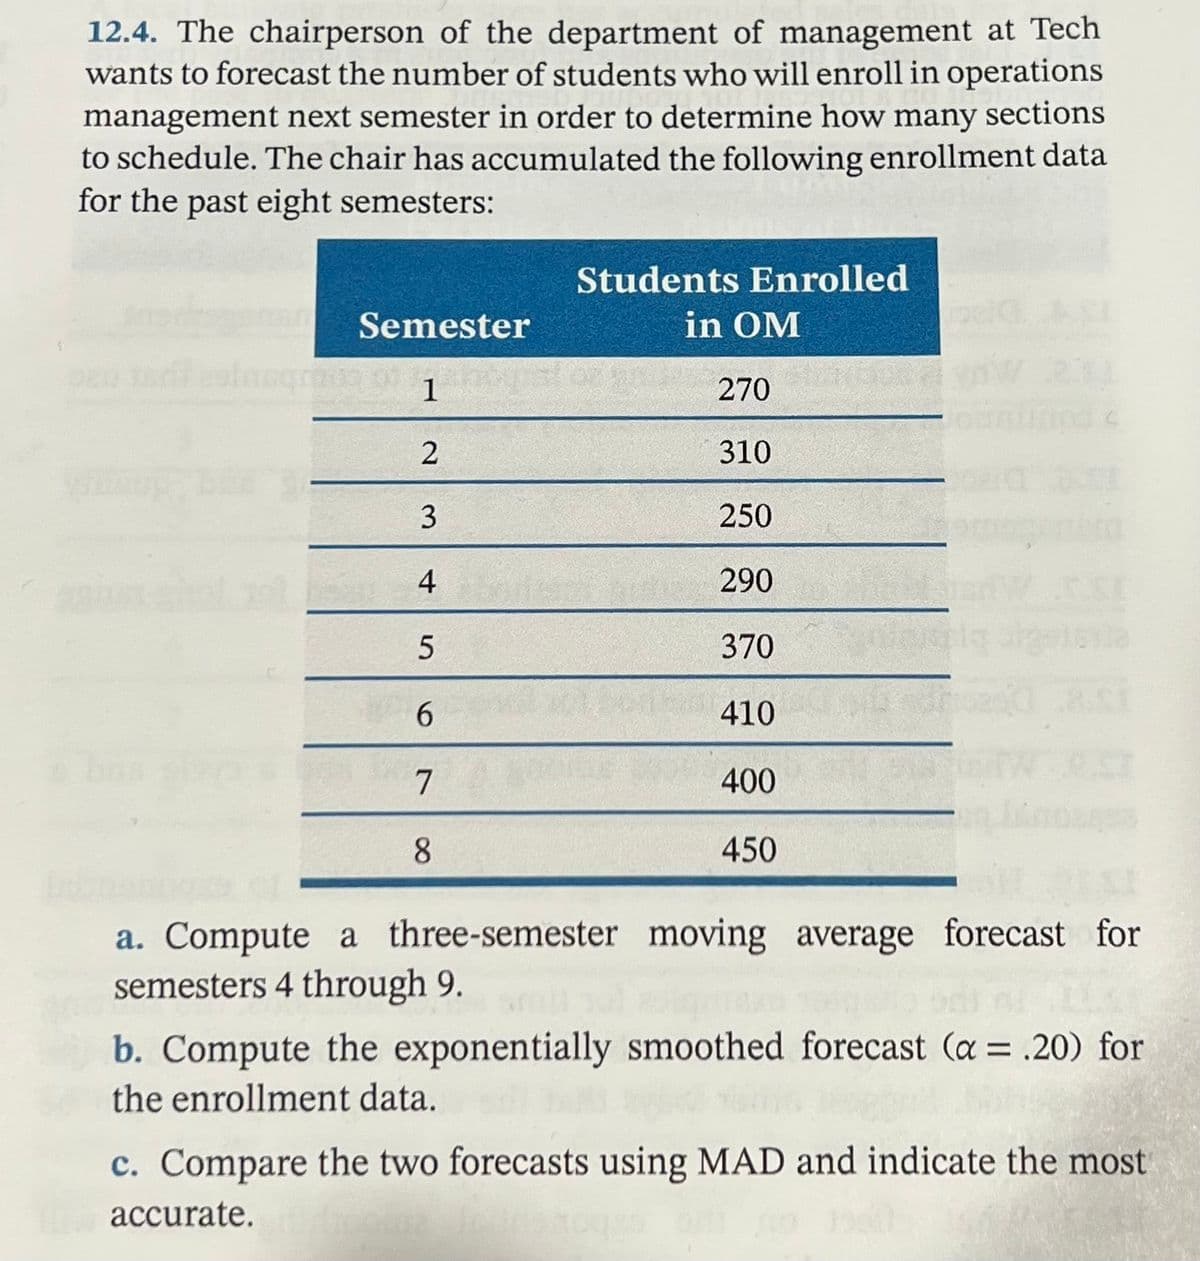 12.4. The chairperson of the department of management at Tech
wants to forecast the number of students who will enroll in operations
management next semester in order to determine how many sections
to schedule. The chair has accumulated the following enrollment data
for the past eight semesters:
Students Enrolled
Semester
in OM
1
270
2
310
250
4
290
370
6.
410
7
400
8.
450
a. Compute a three-semester moving average forecast for
semesters 4 through 9.
b. Compute the exponentially smoothed forecast (a = .20) for
the enrollment data.
c. Compare the two forecasts using MAD and indicate the most
accurate.
3.
